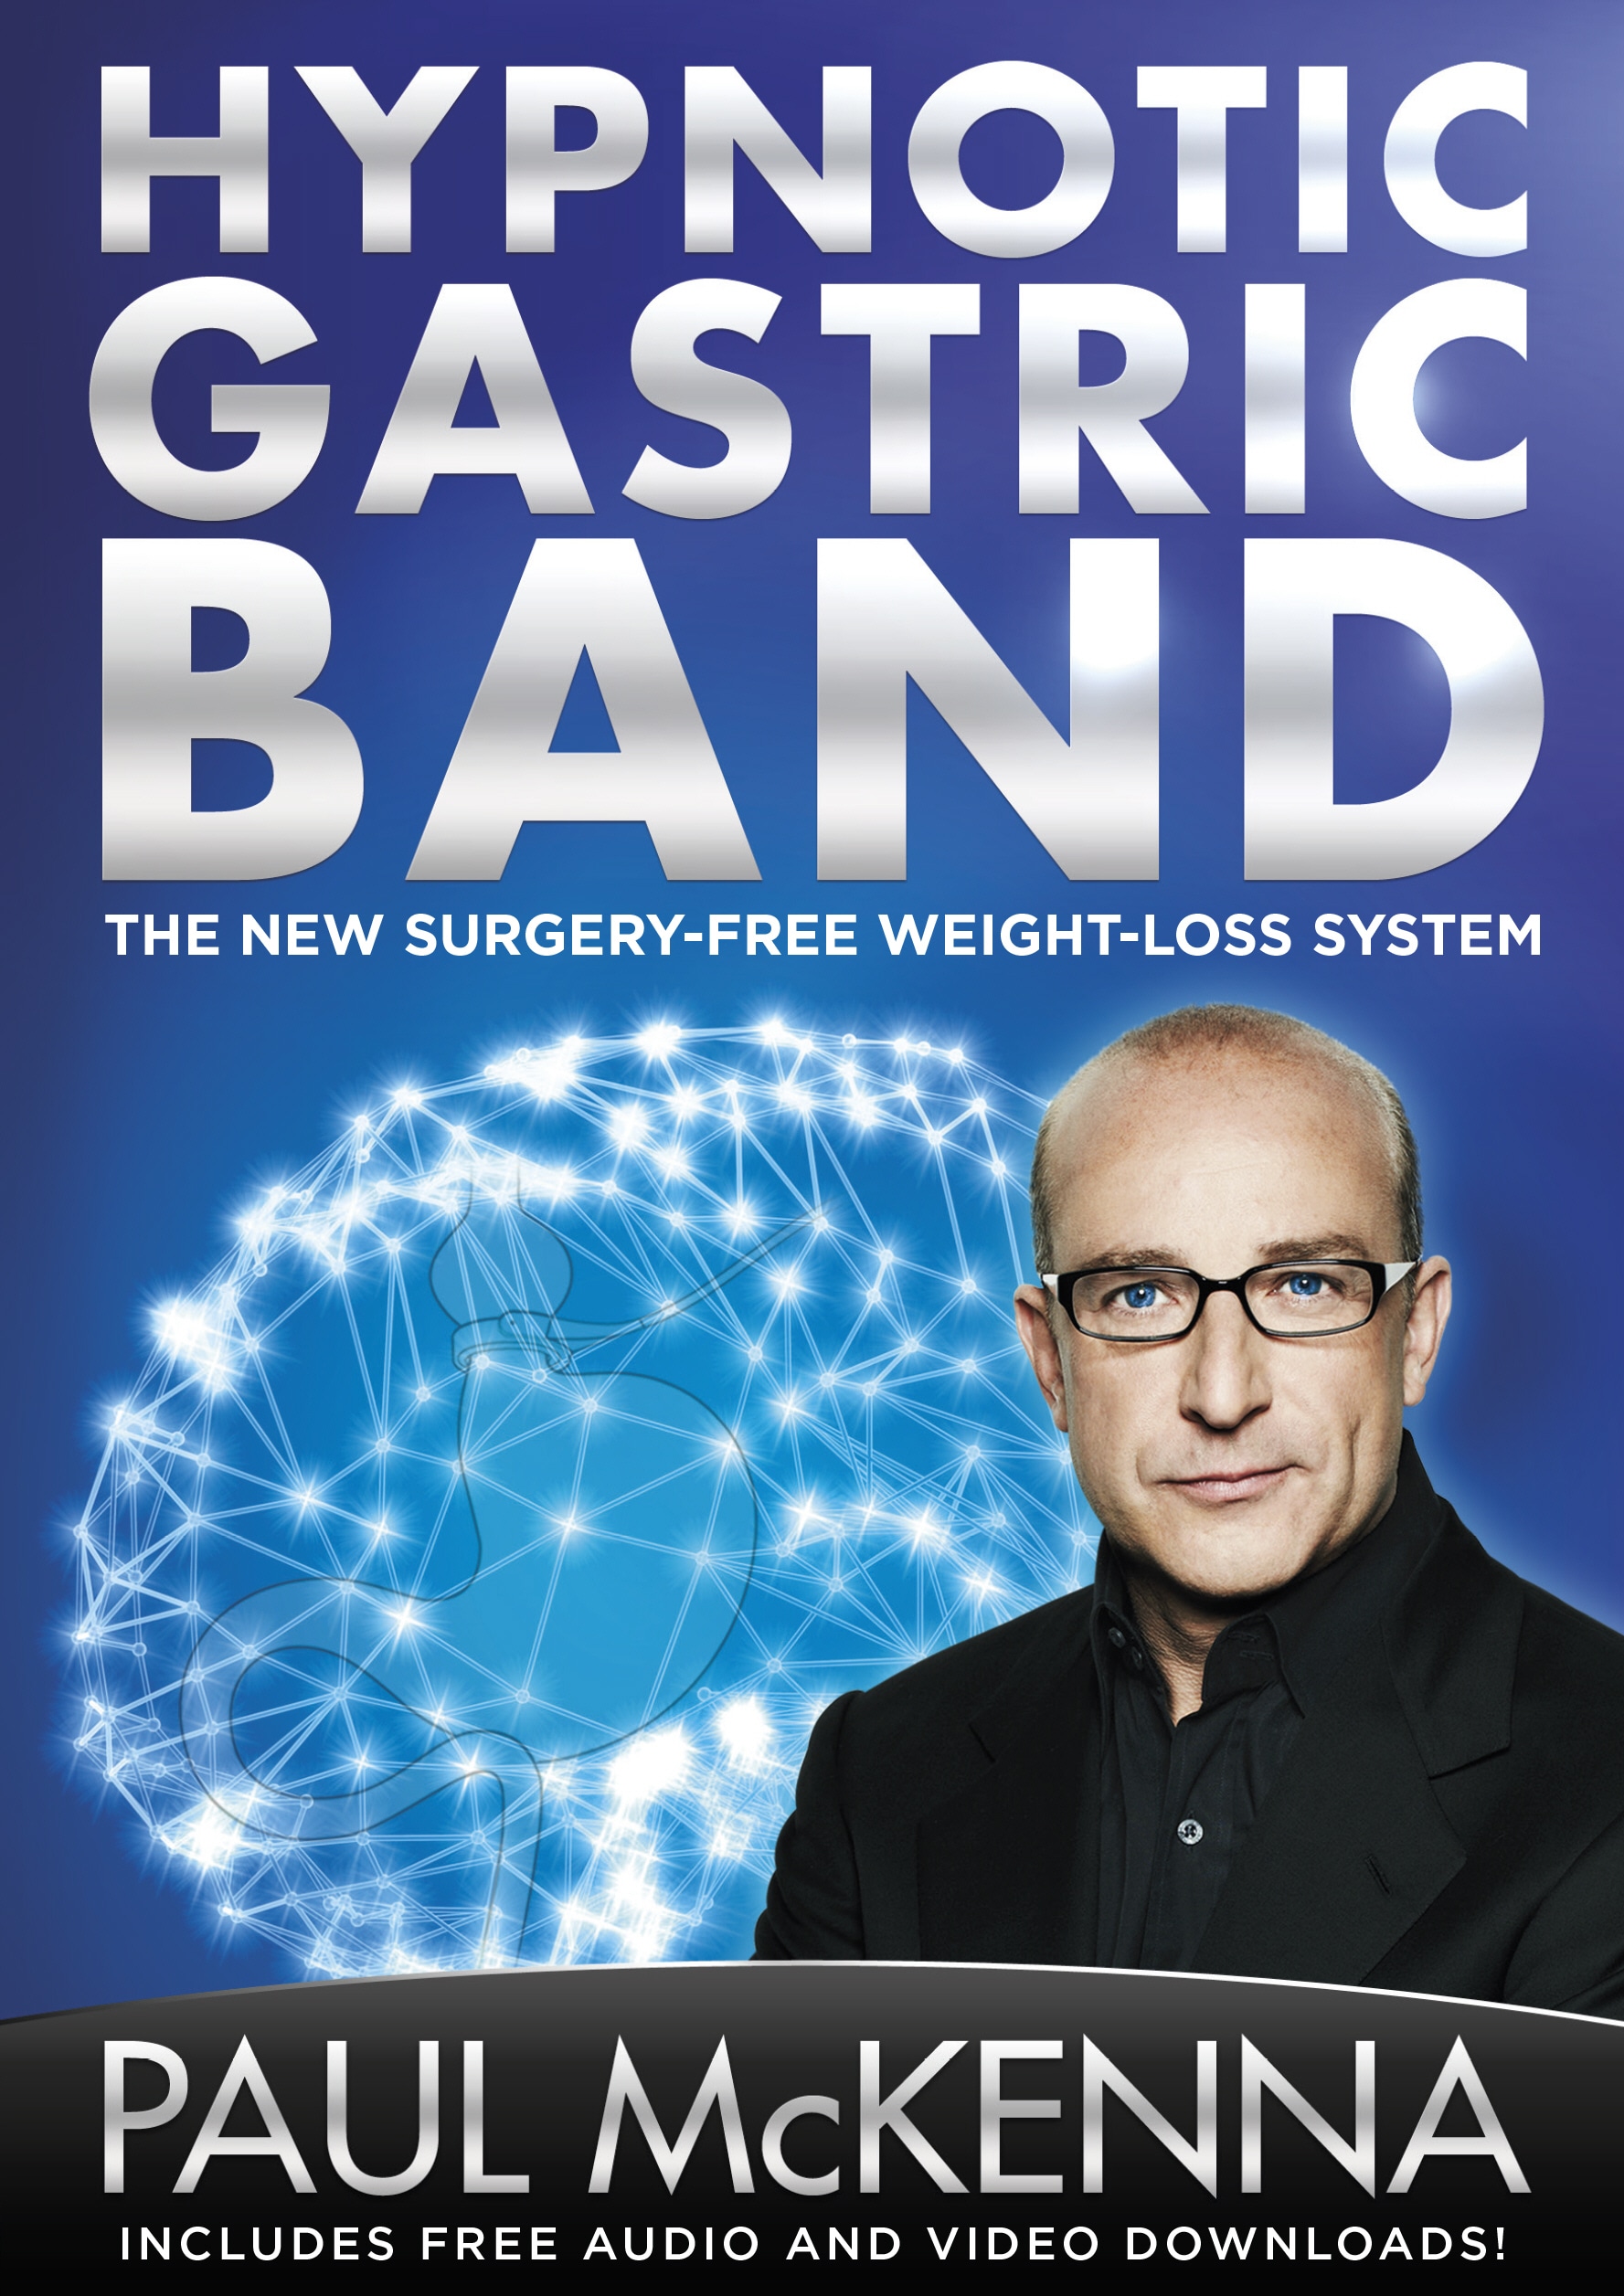 Book “The Hypnotic Gastric Band” by Paul McKenna — December 12, 2019